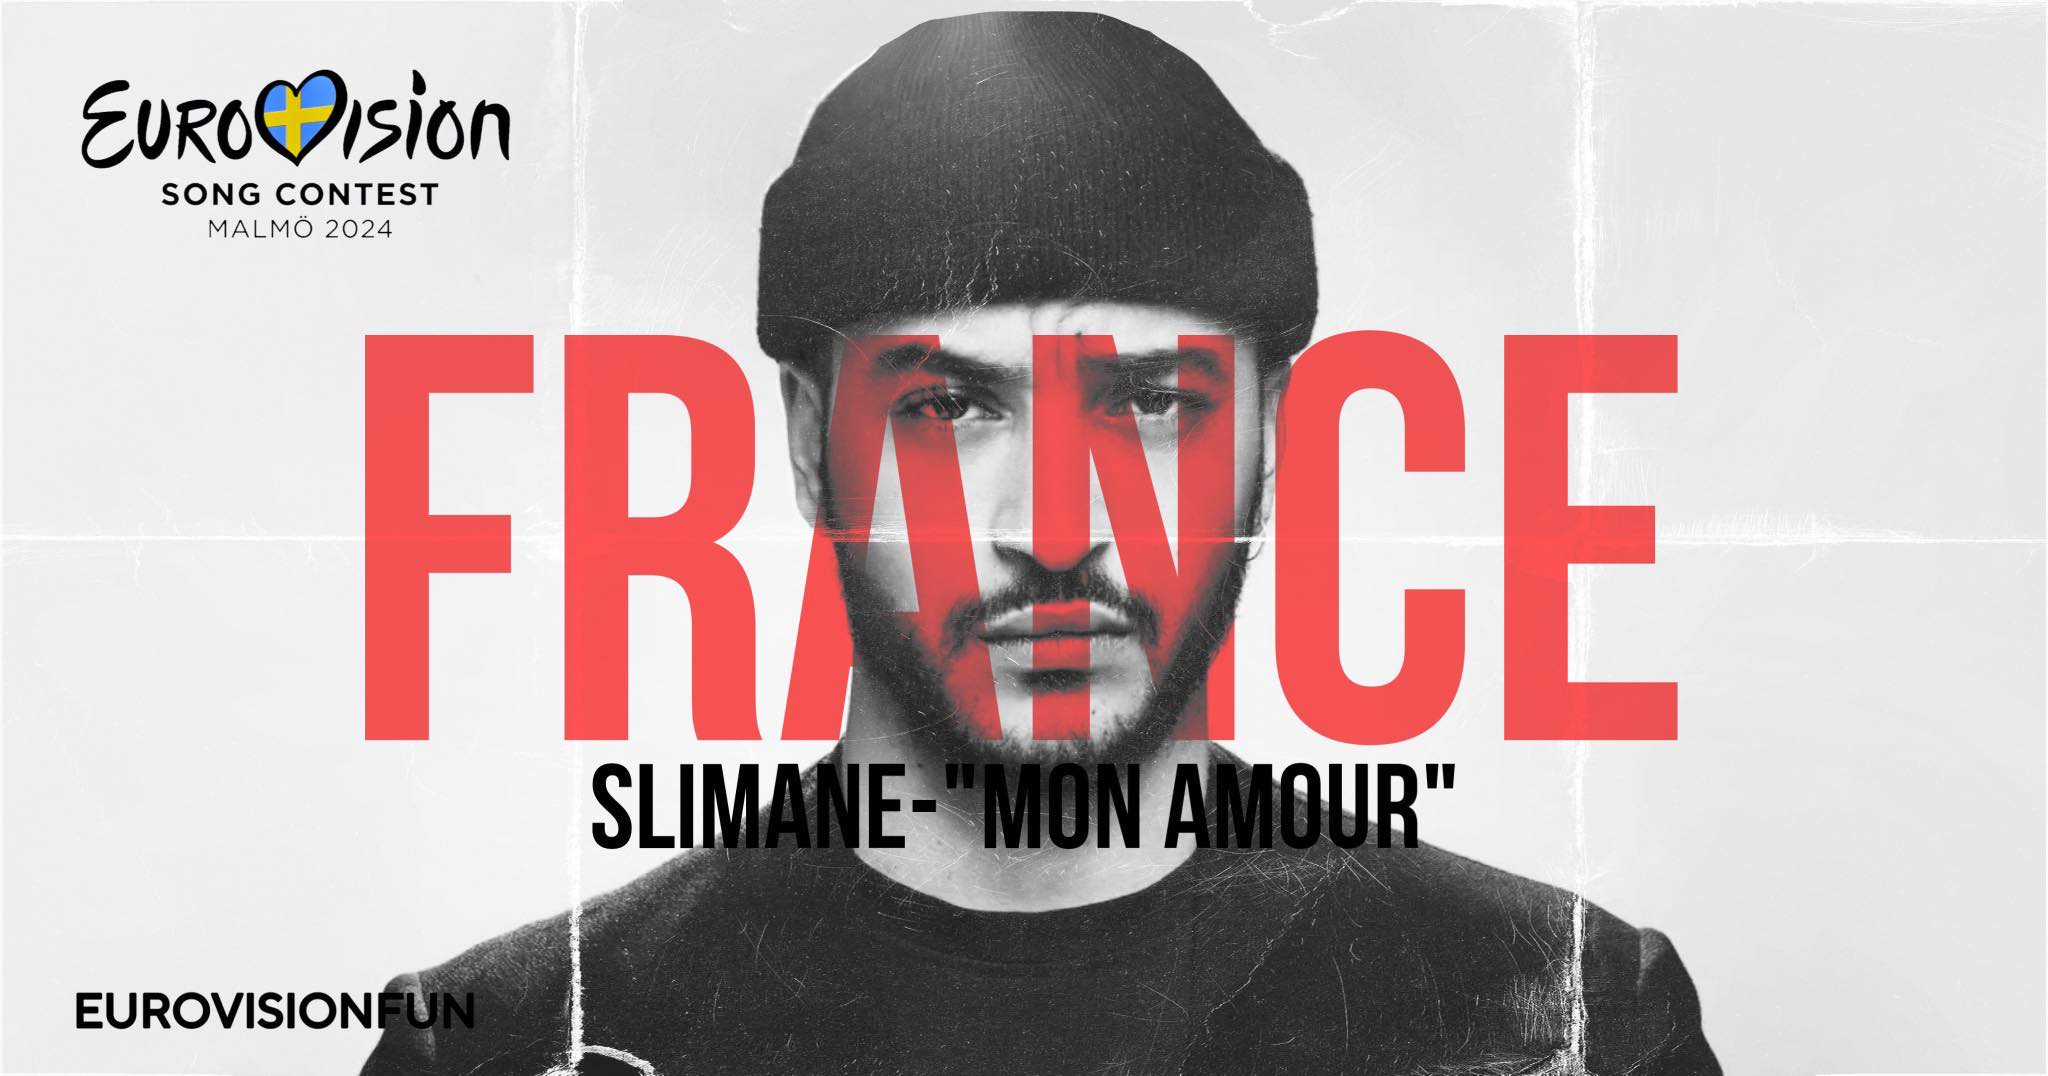 France's Melodic Debut! ! Mon amour' by Slimane is the first Eurovisi